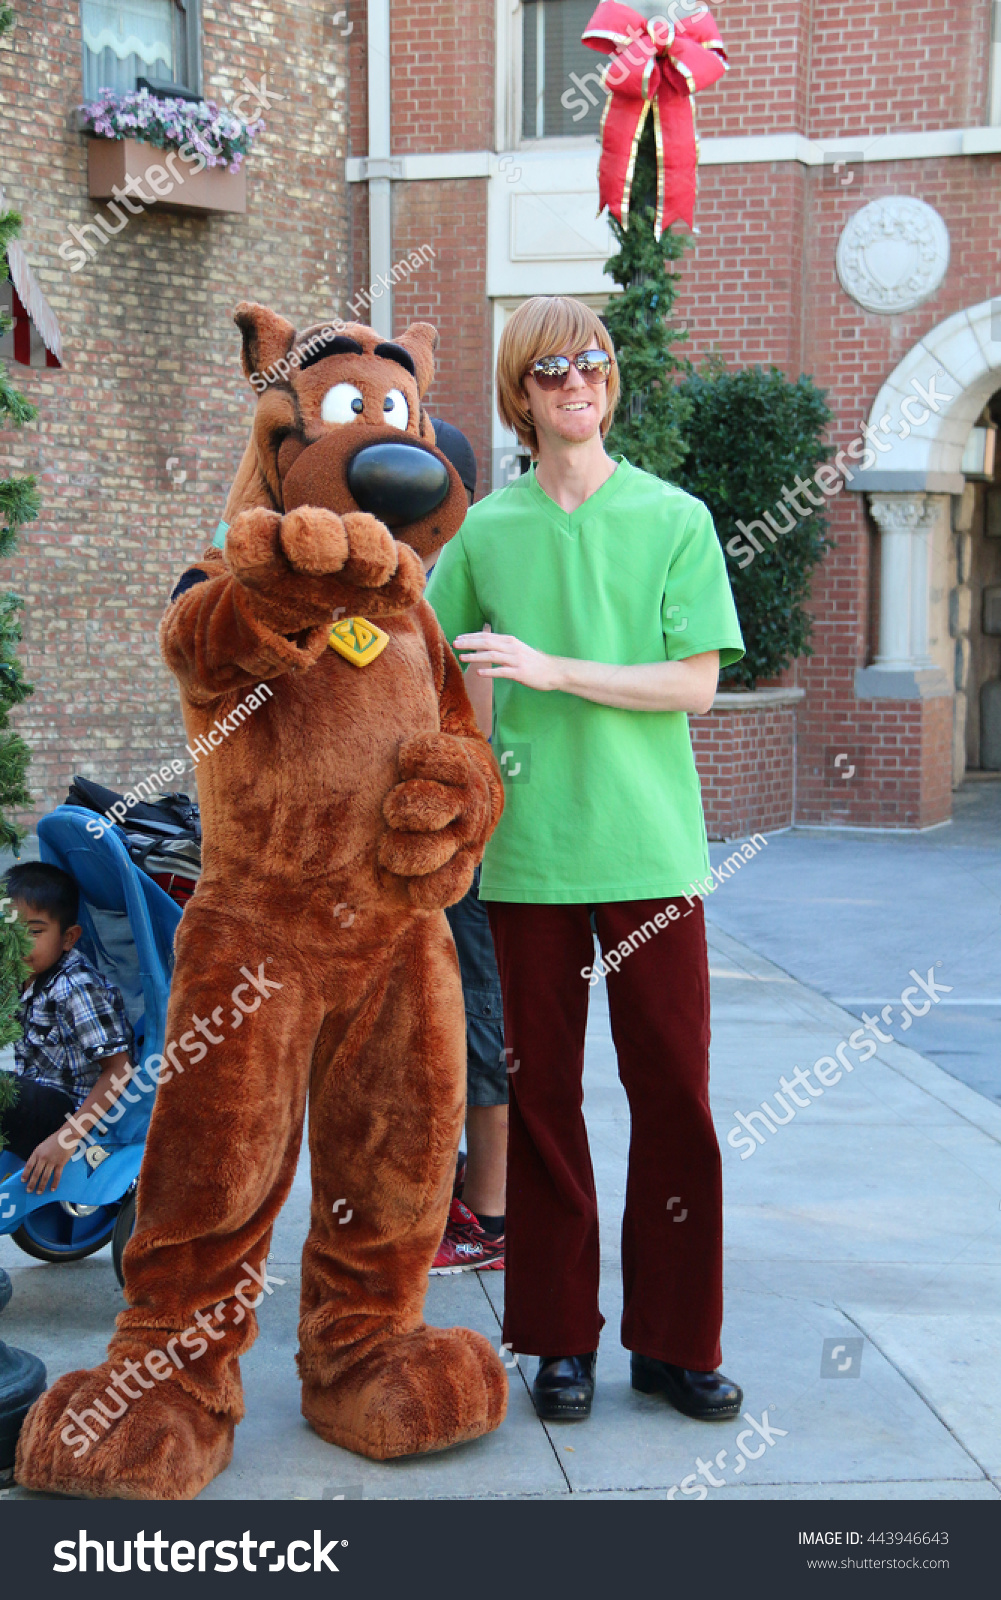 60 Scooby Doo And Shaggy Images, Stock Photos & Vectors | Shutterstock